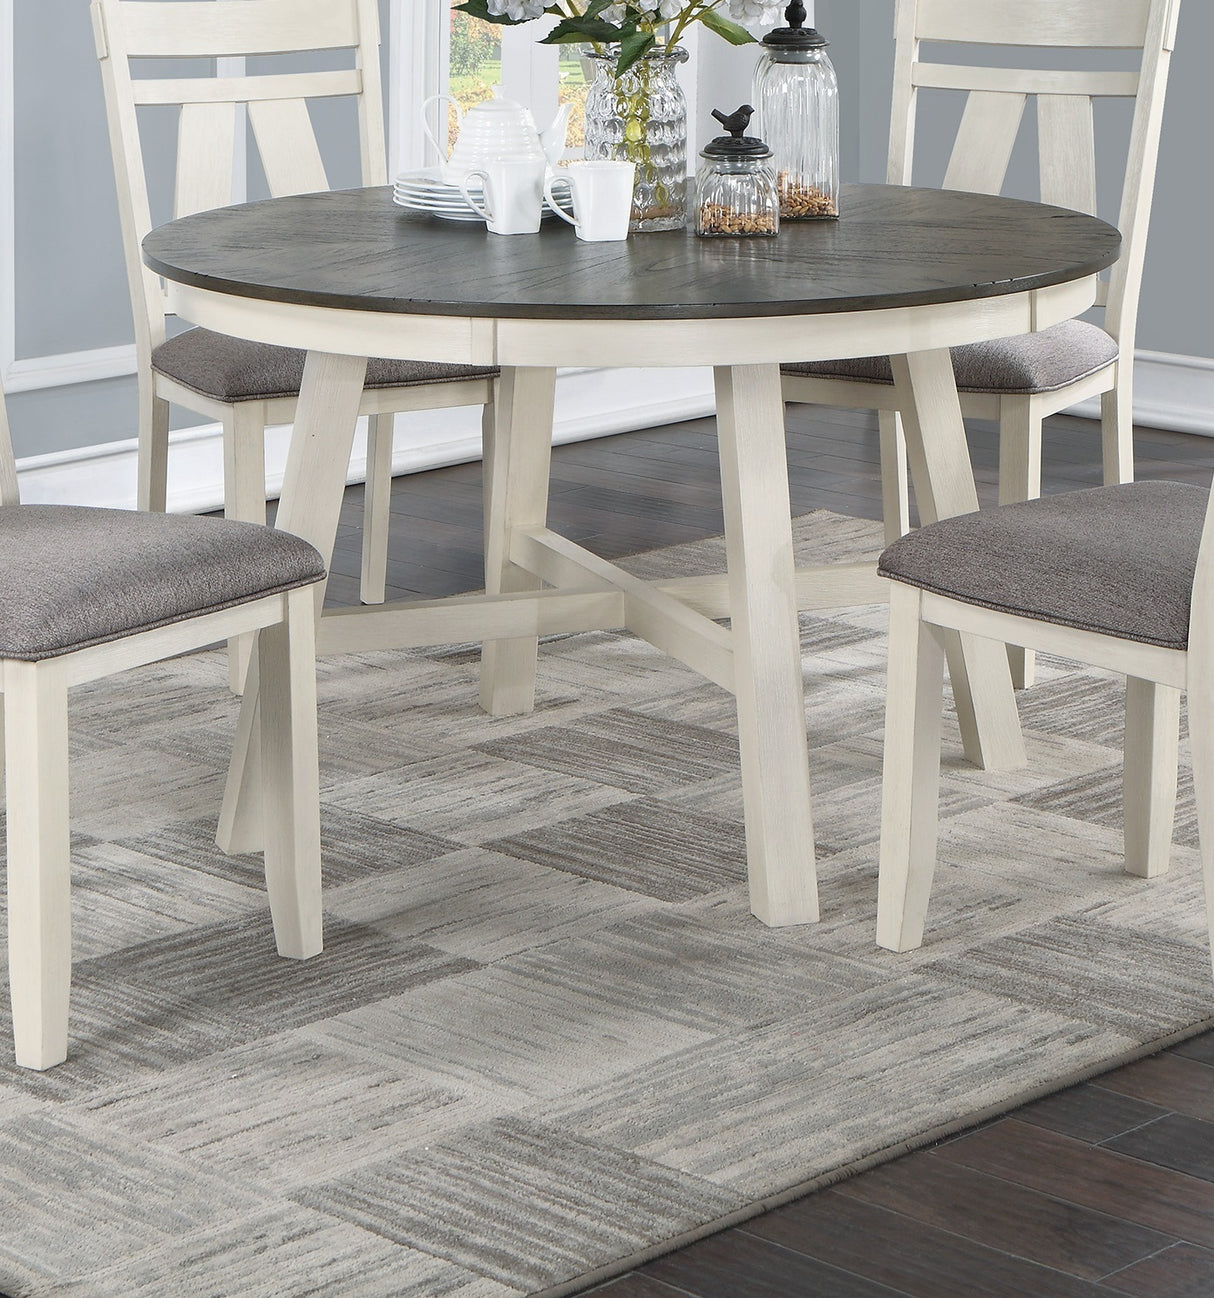 Dining Room Furniture 5pc Dining Set Round Table And 4x Side Chairs Gray Fabric Cushion Seat White Clean Lines Wooden Table Top - Home Elegance USA